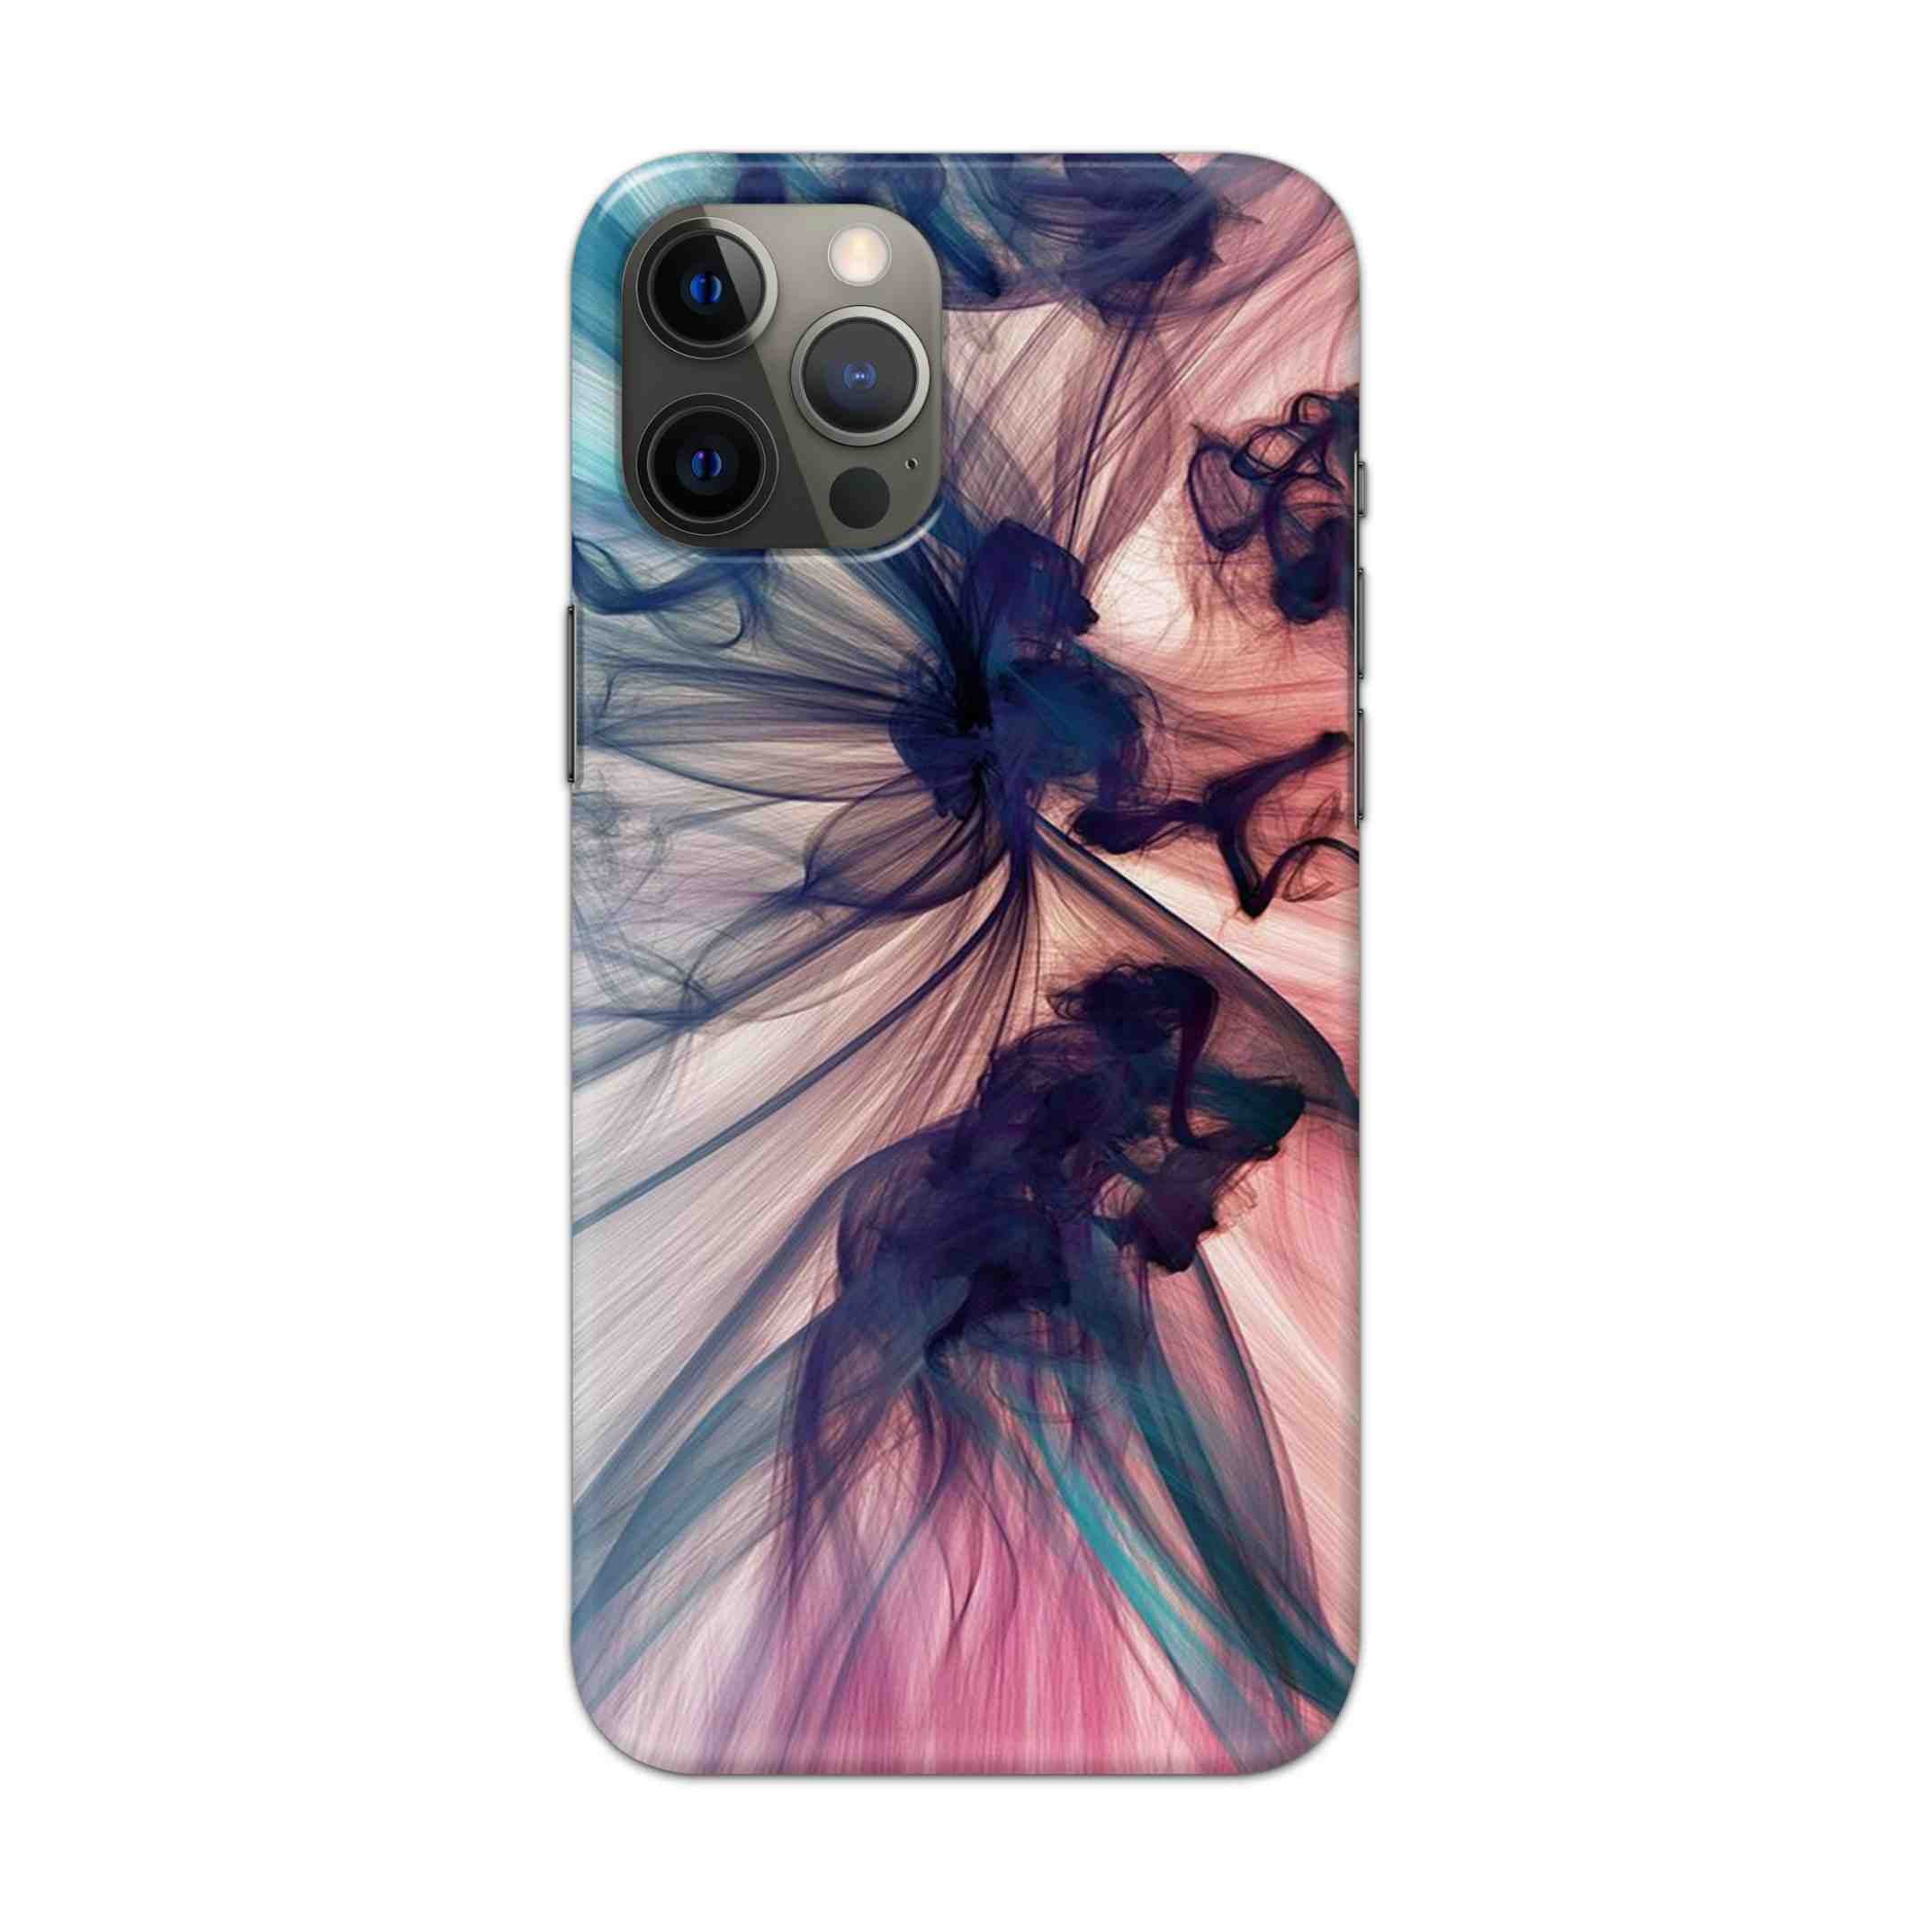 Buy Colourful Texture Hard Back Mobile Phone Case Cover For Apple iPhone 12 pro Online